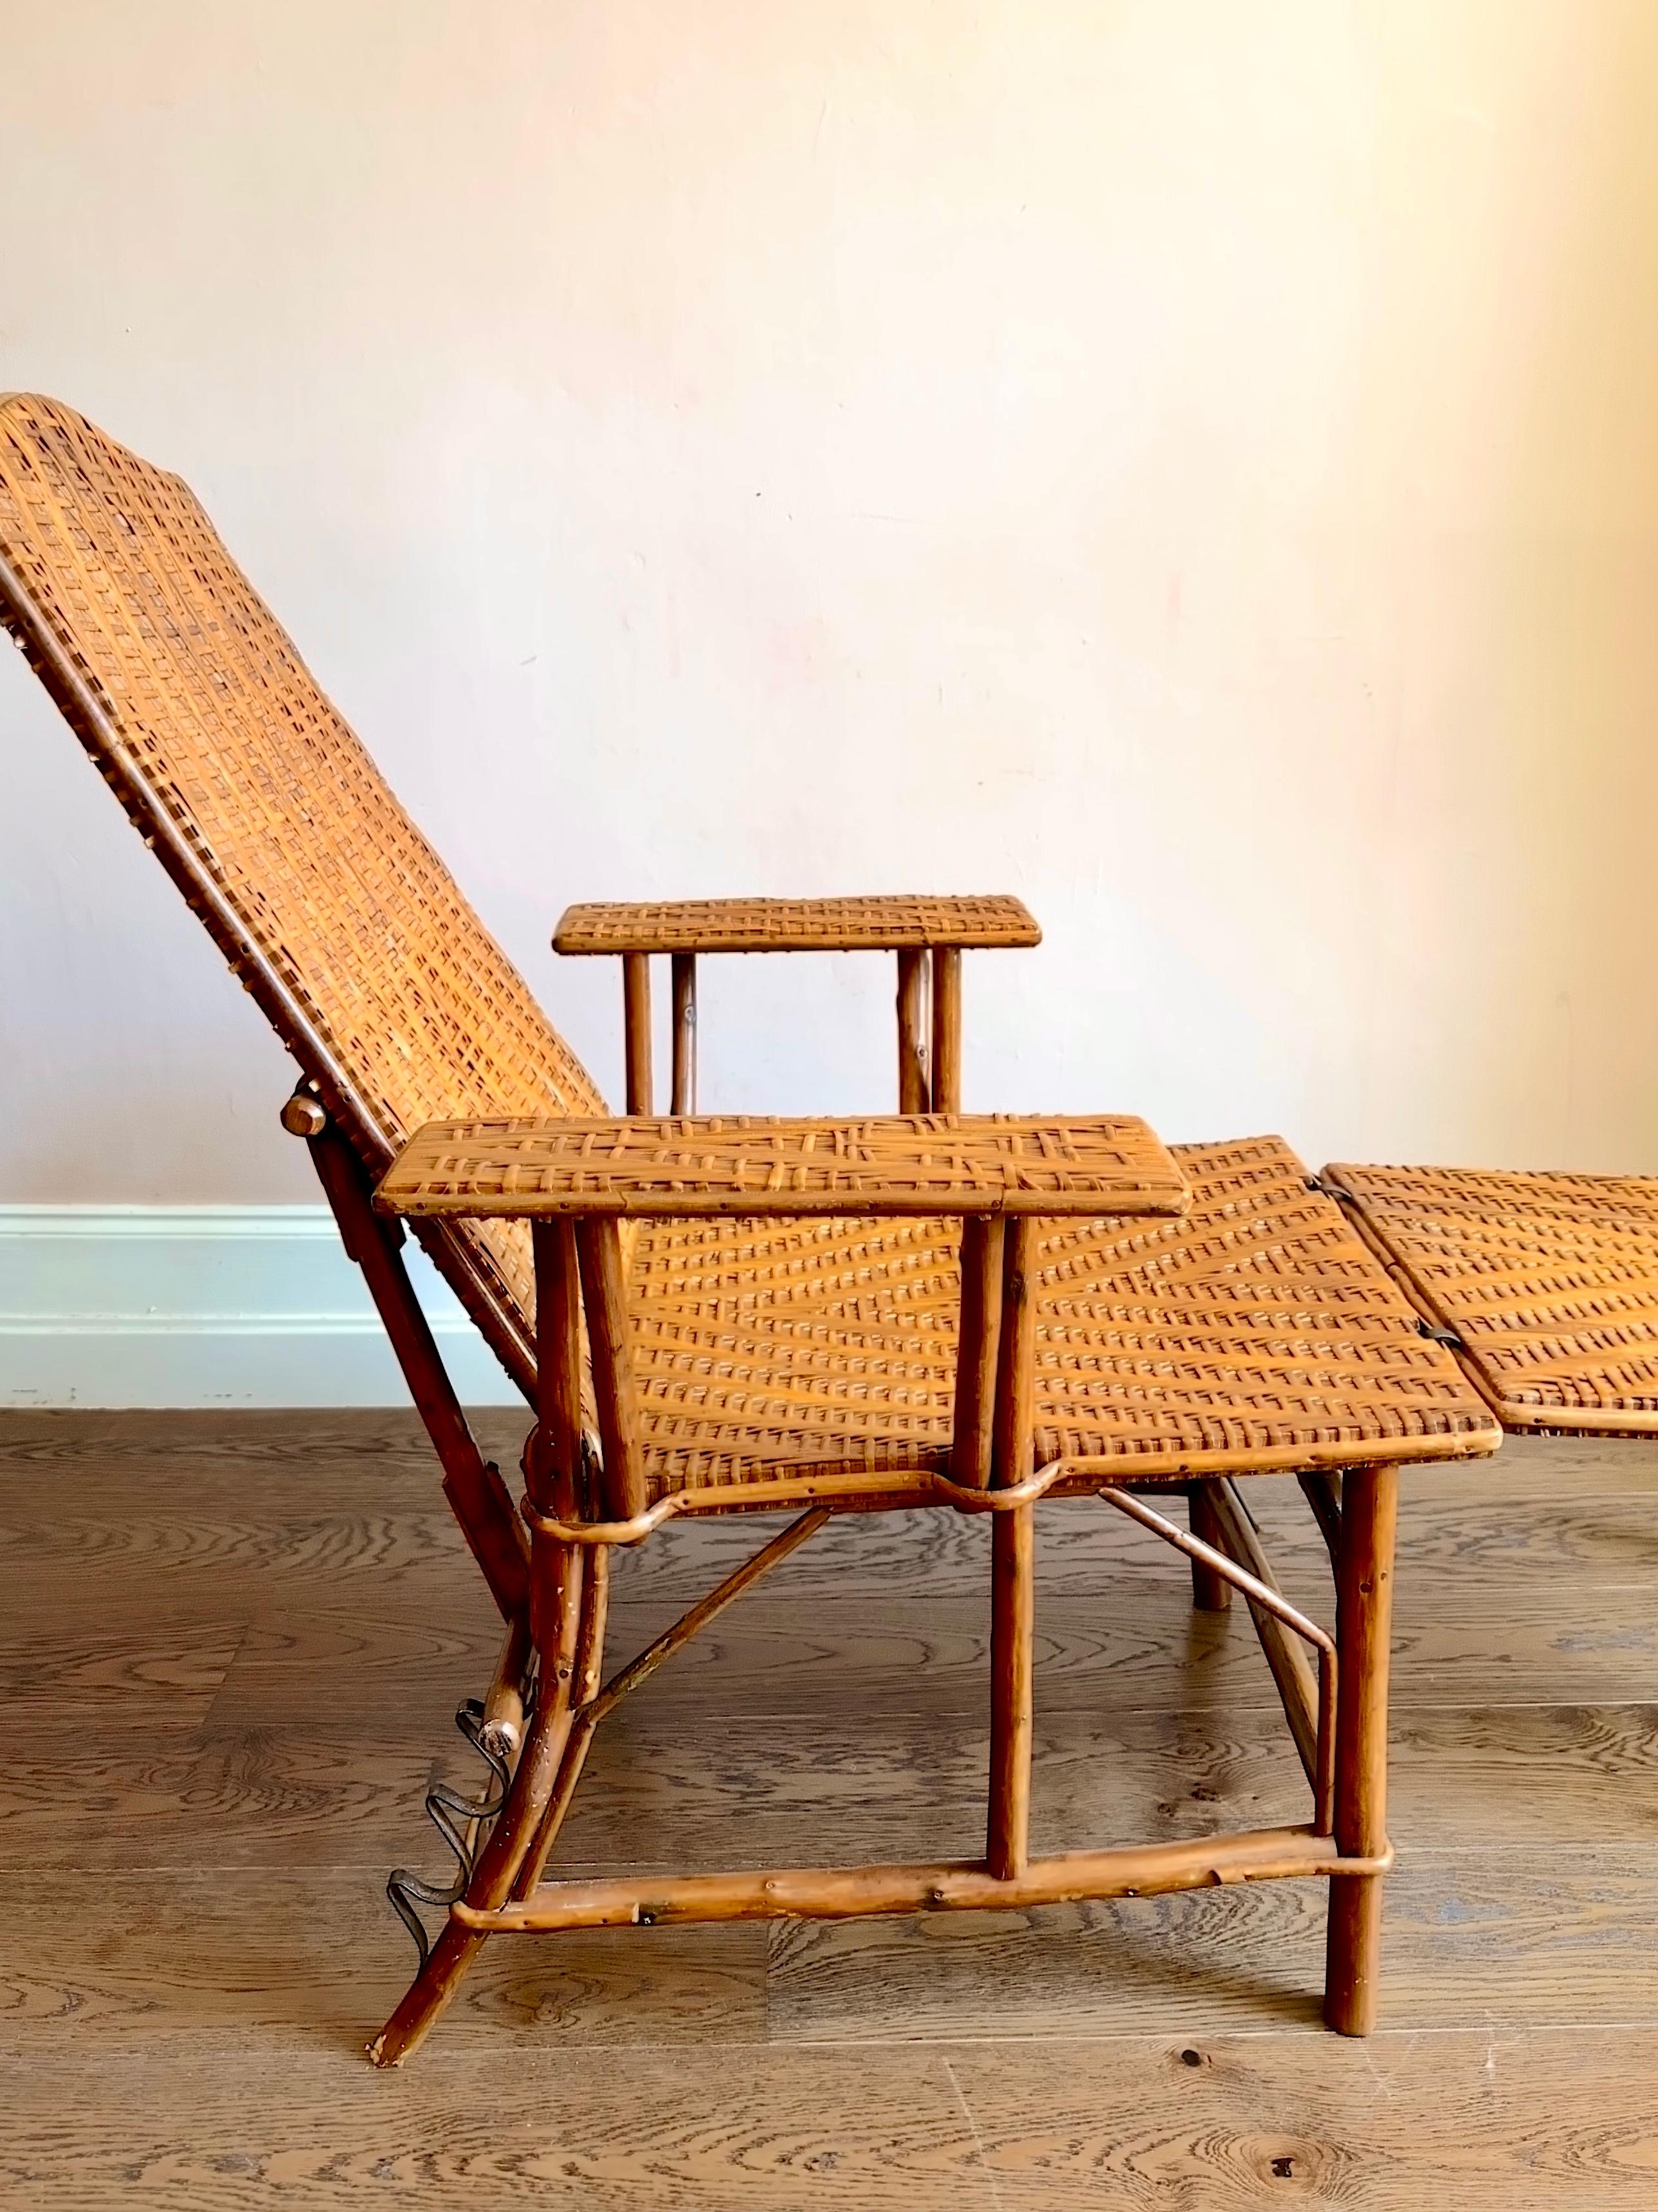 Hand-Woven 1930s French Rattan & Wood Chaise Longue Sun Lounger